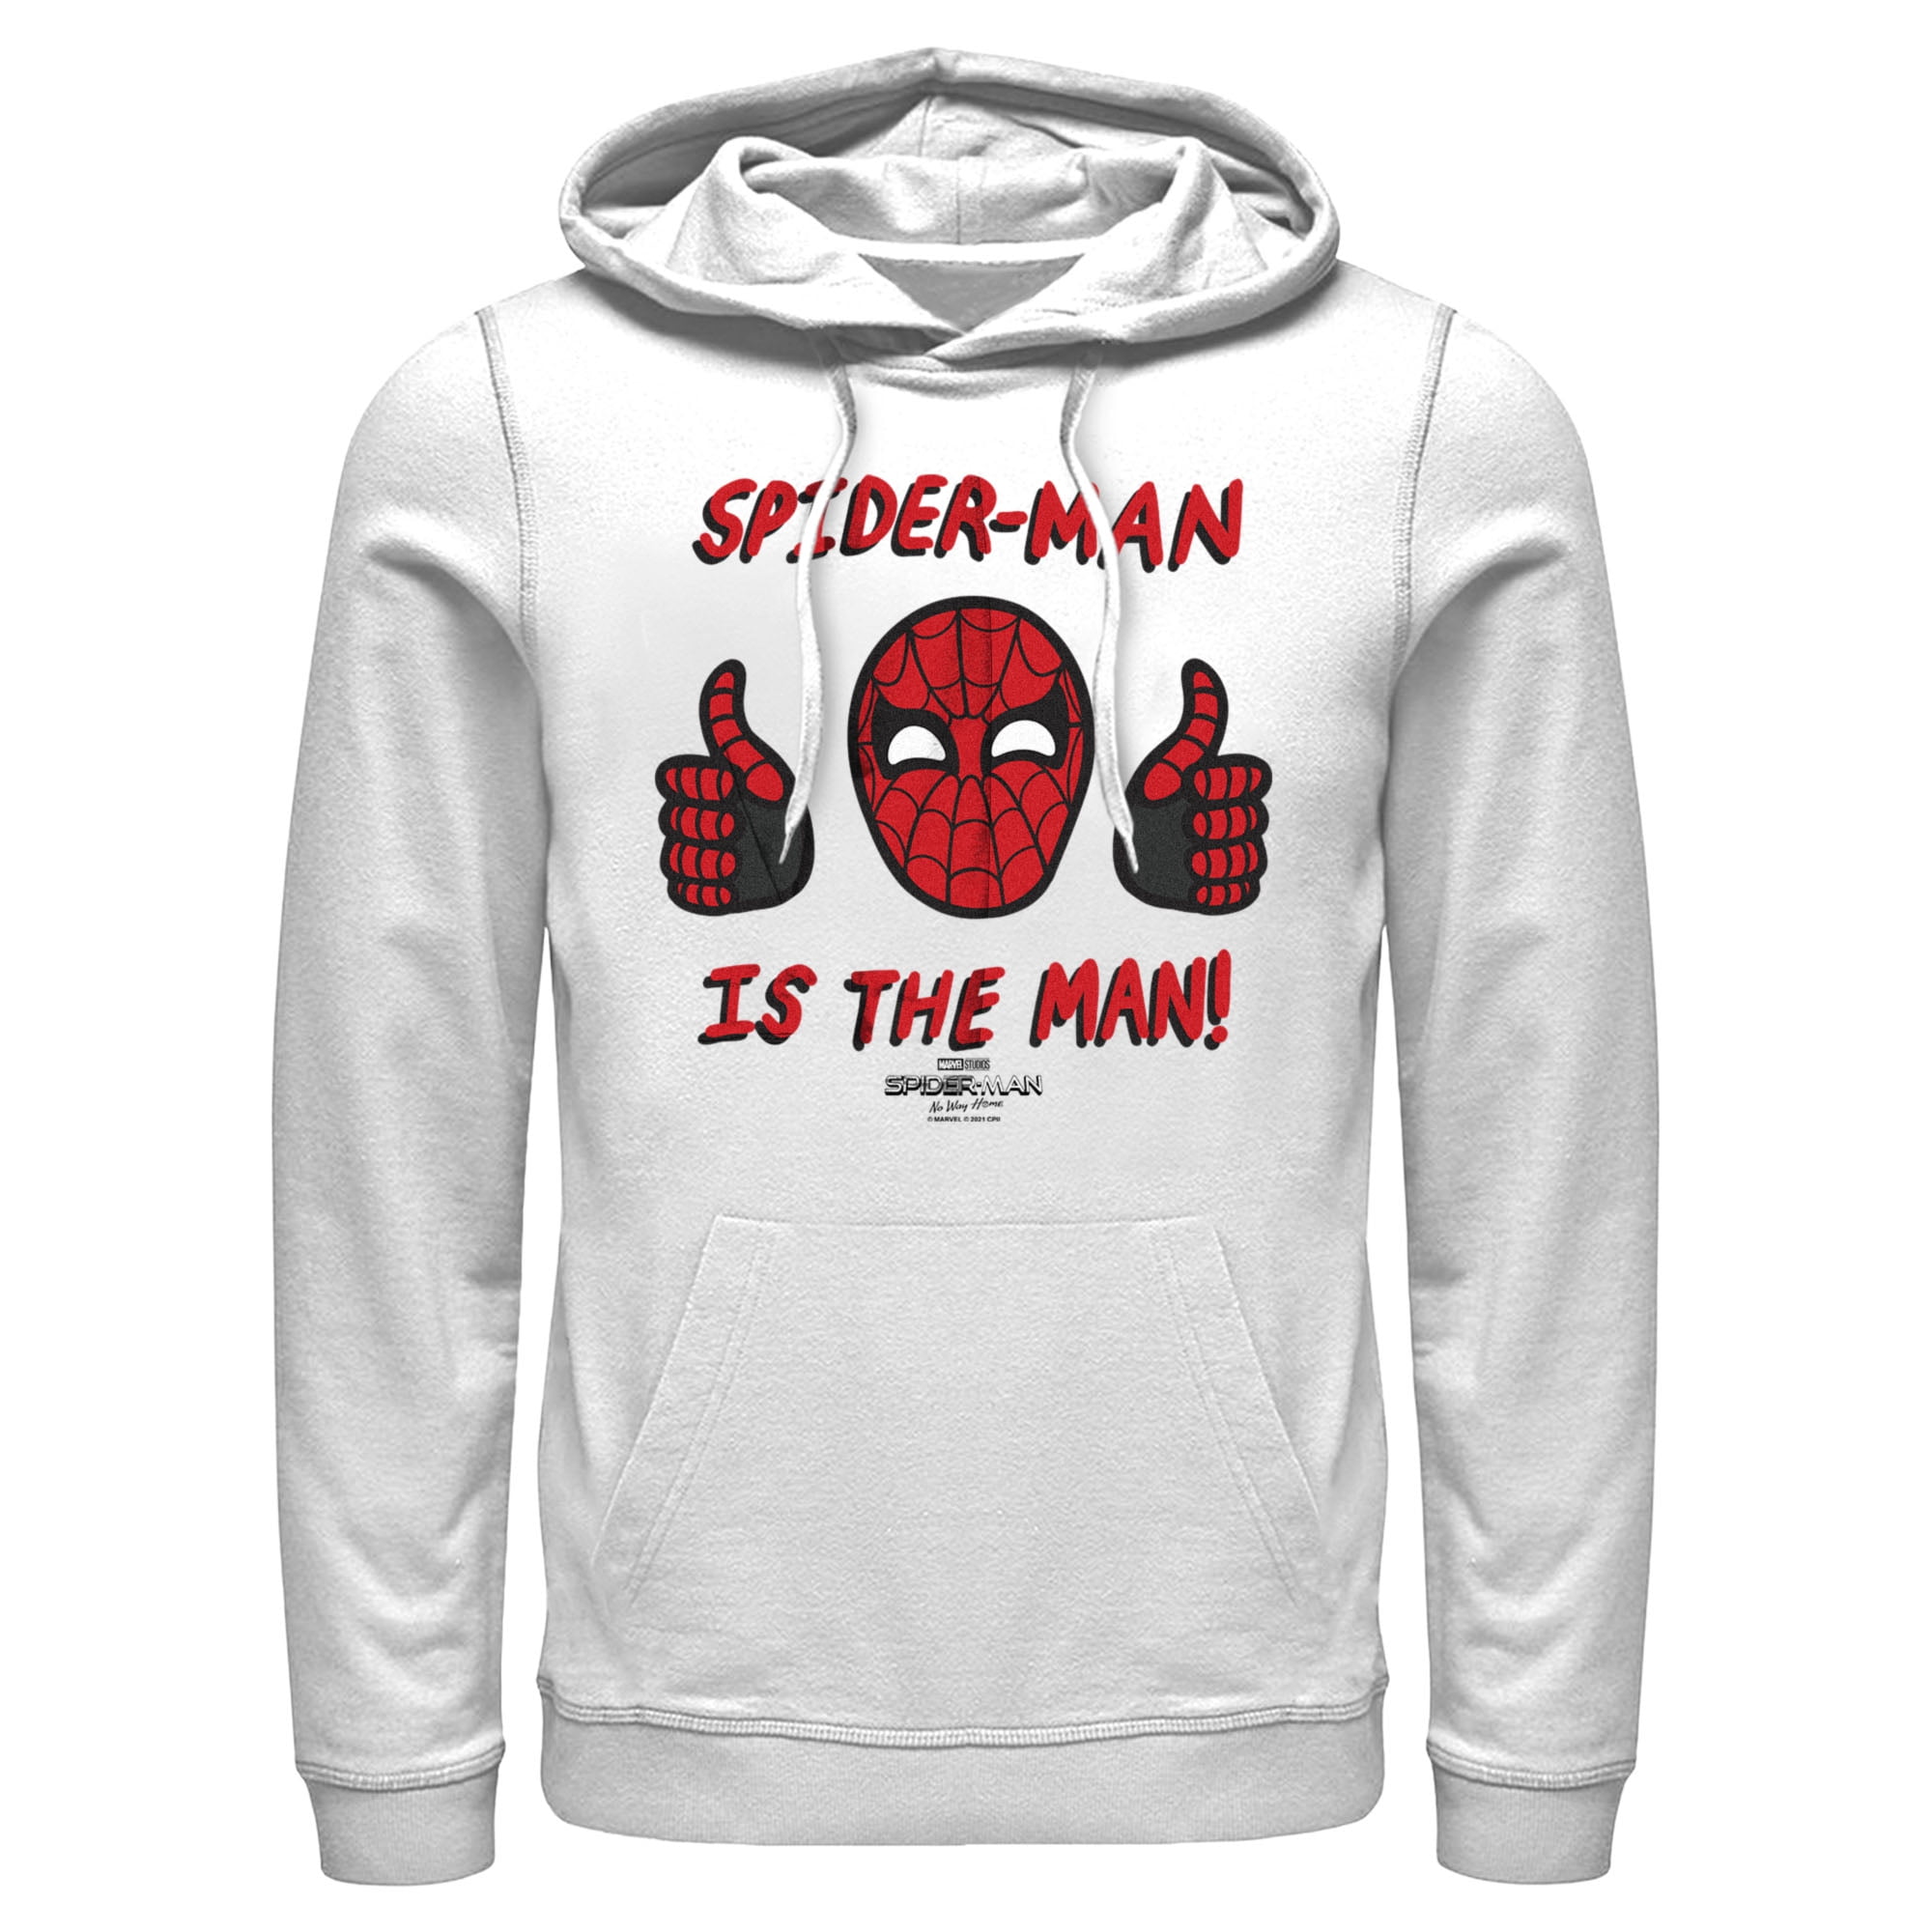 Men's Marvel Spider-Man: No Way Home The Man Pull Over Hoodie White Small 